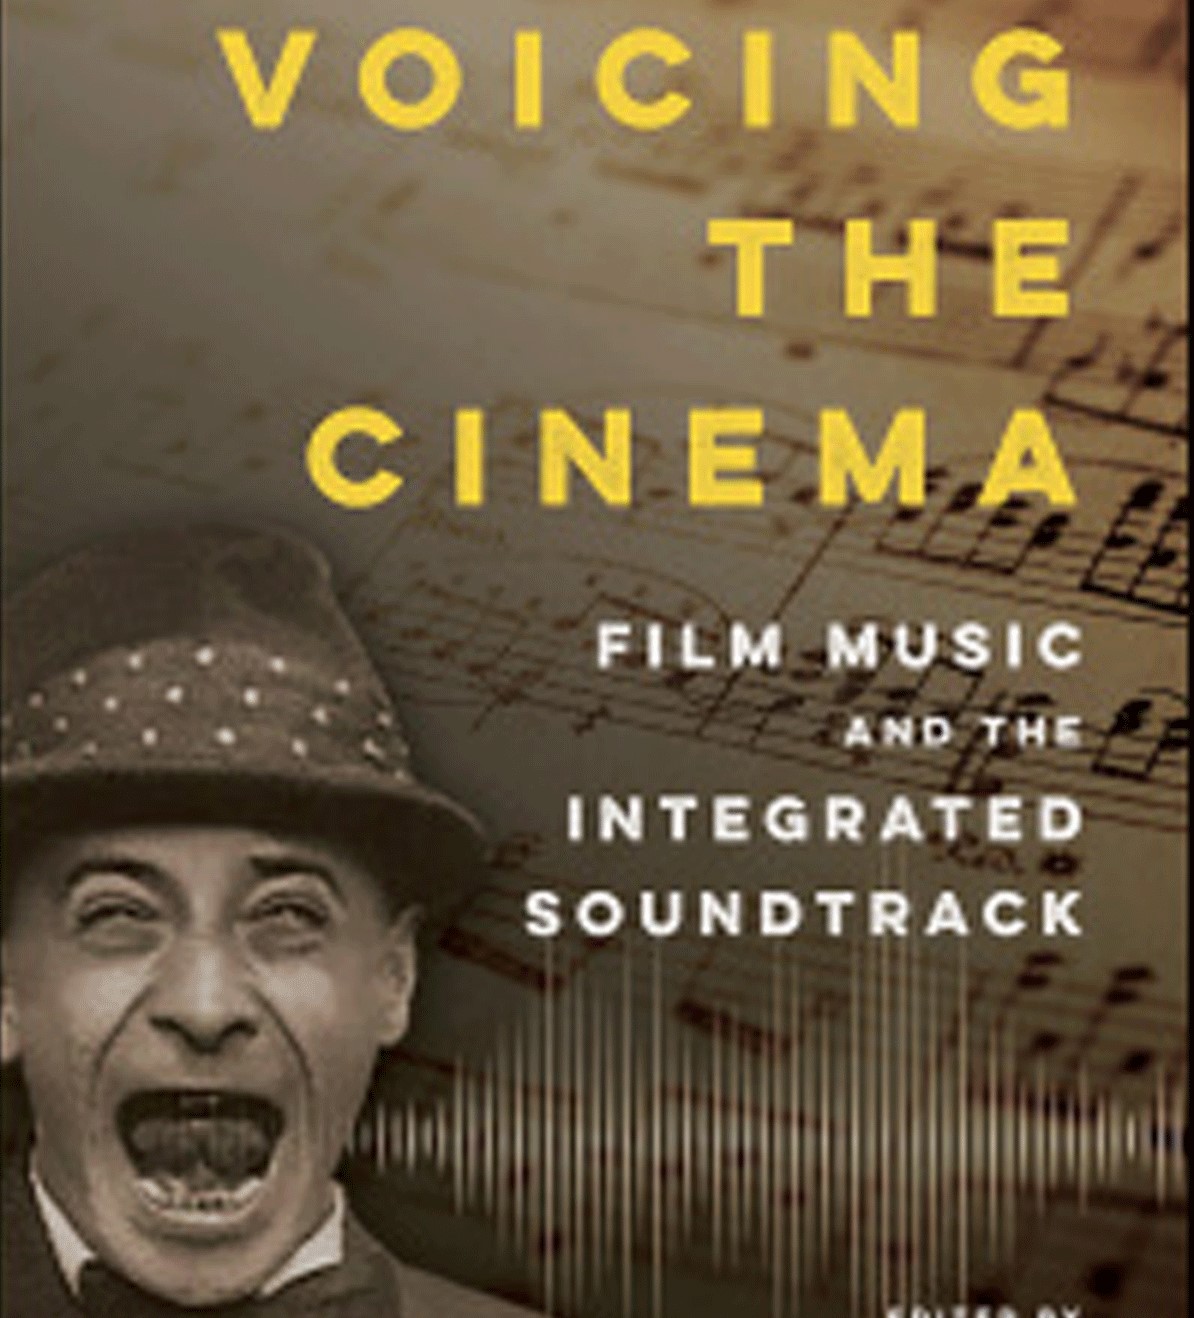 Book Review: James Buhler and Hannah Lewis (eds), Voicing the Cinema: Film Music and the Integrated Soundtrack (Chicago: University of Illinois Press, 2020)